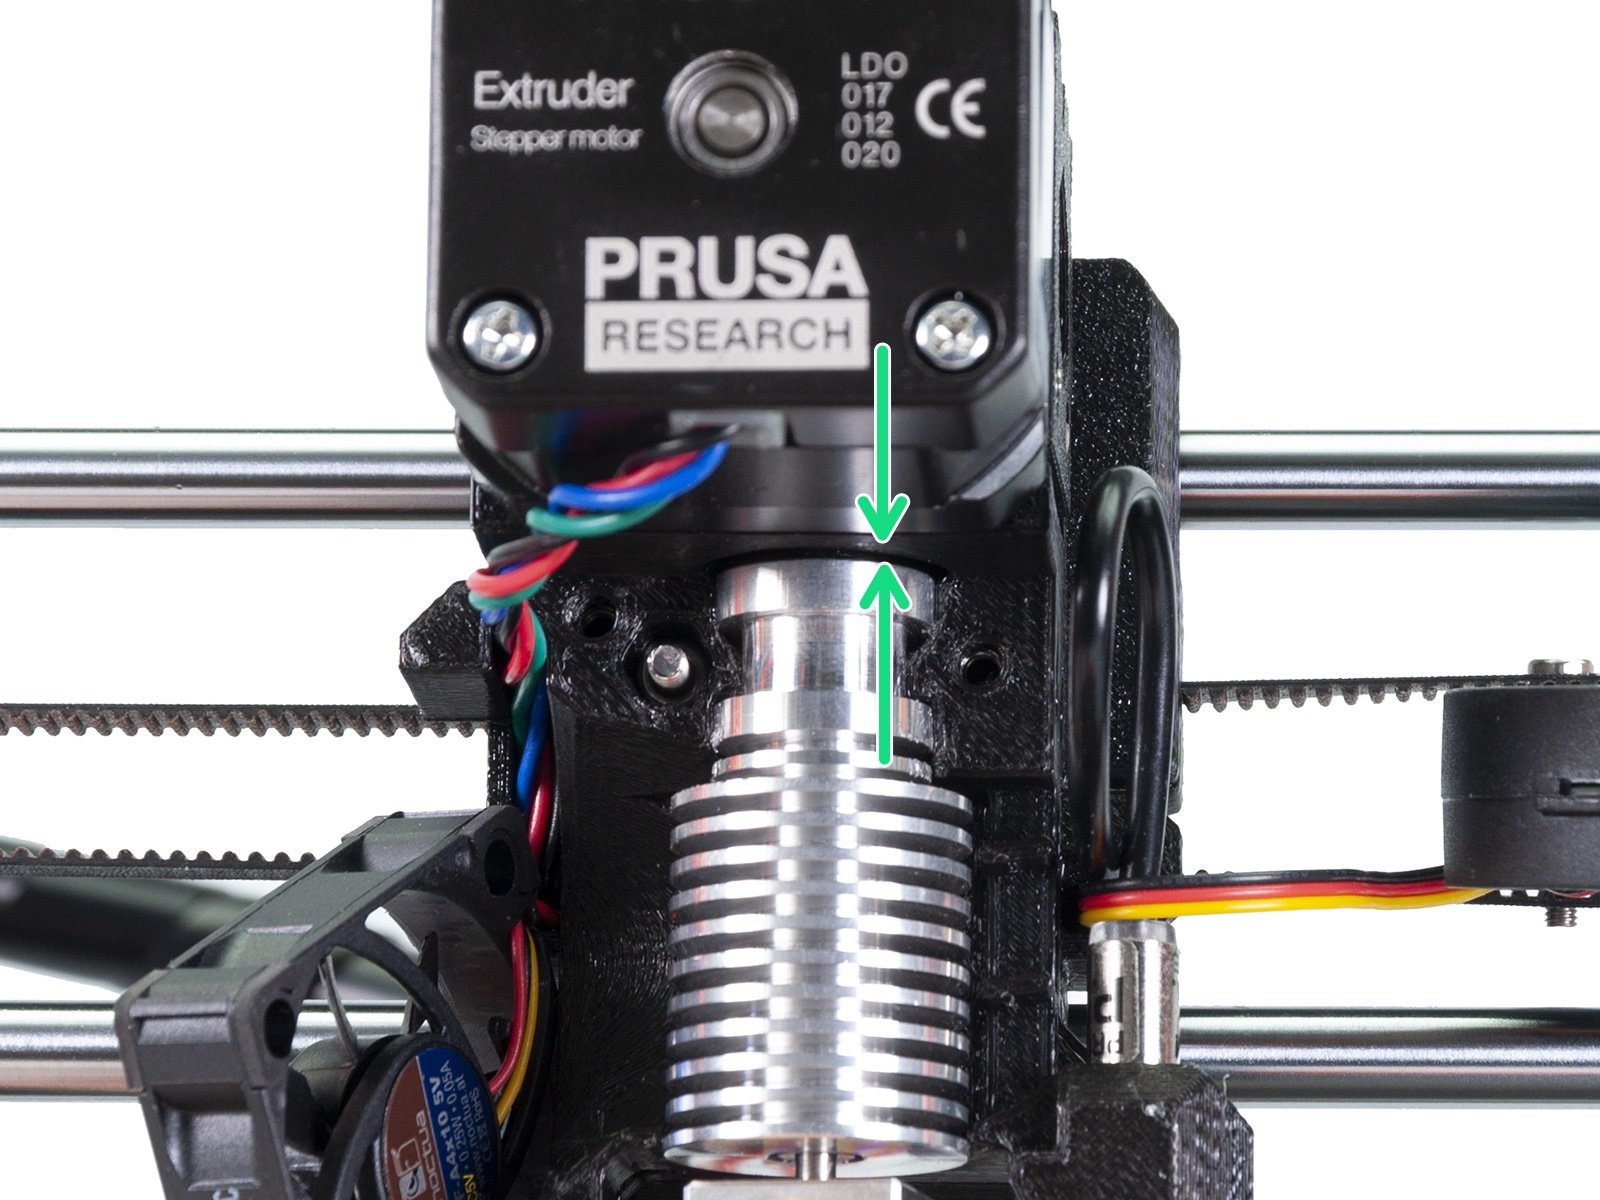 Partial disassembly of the extruder